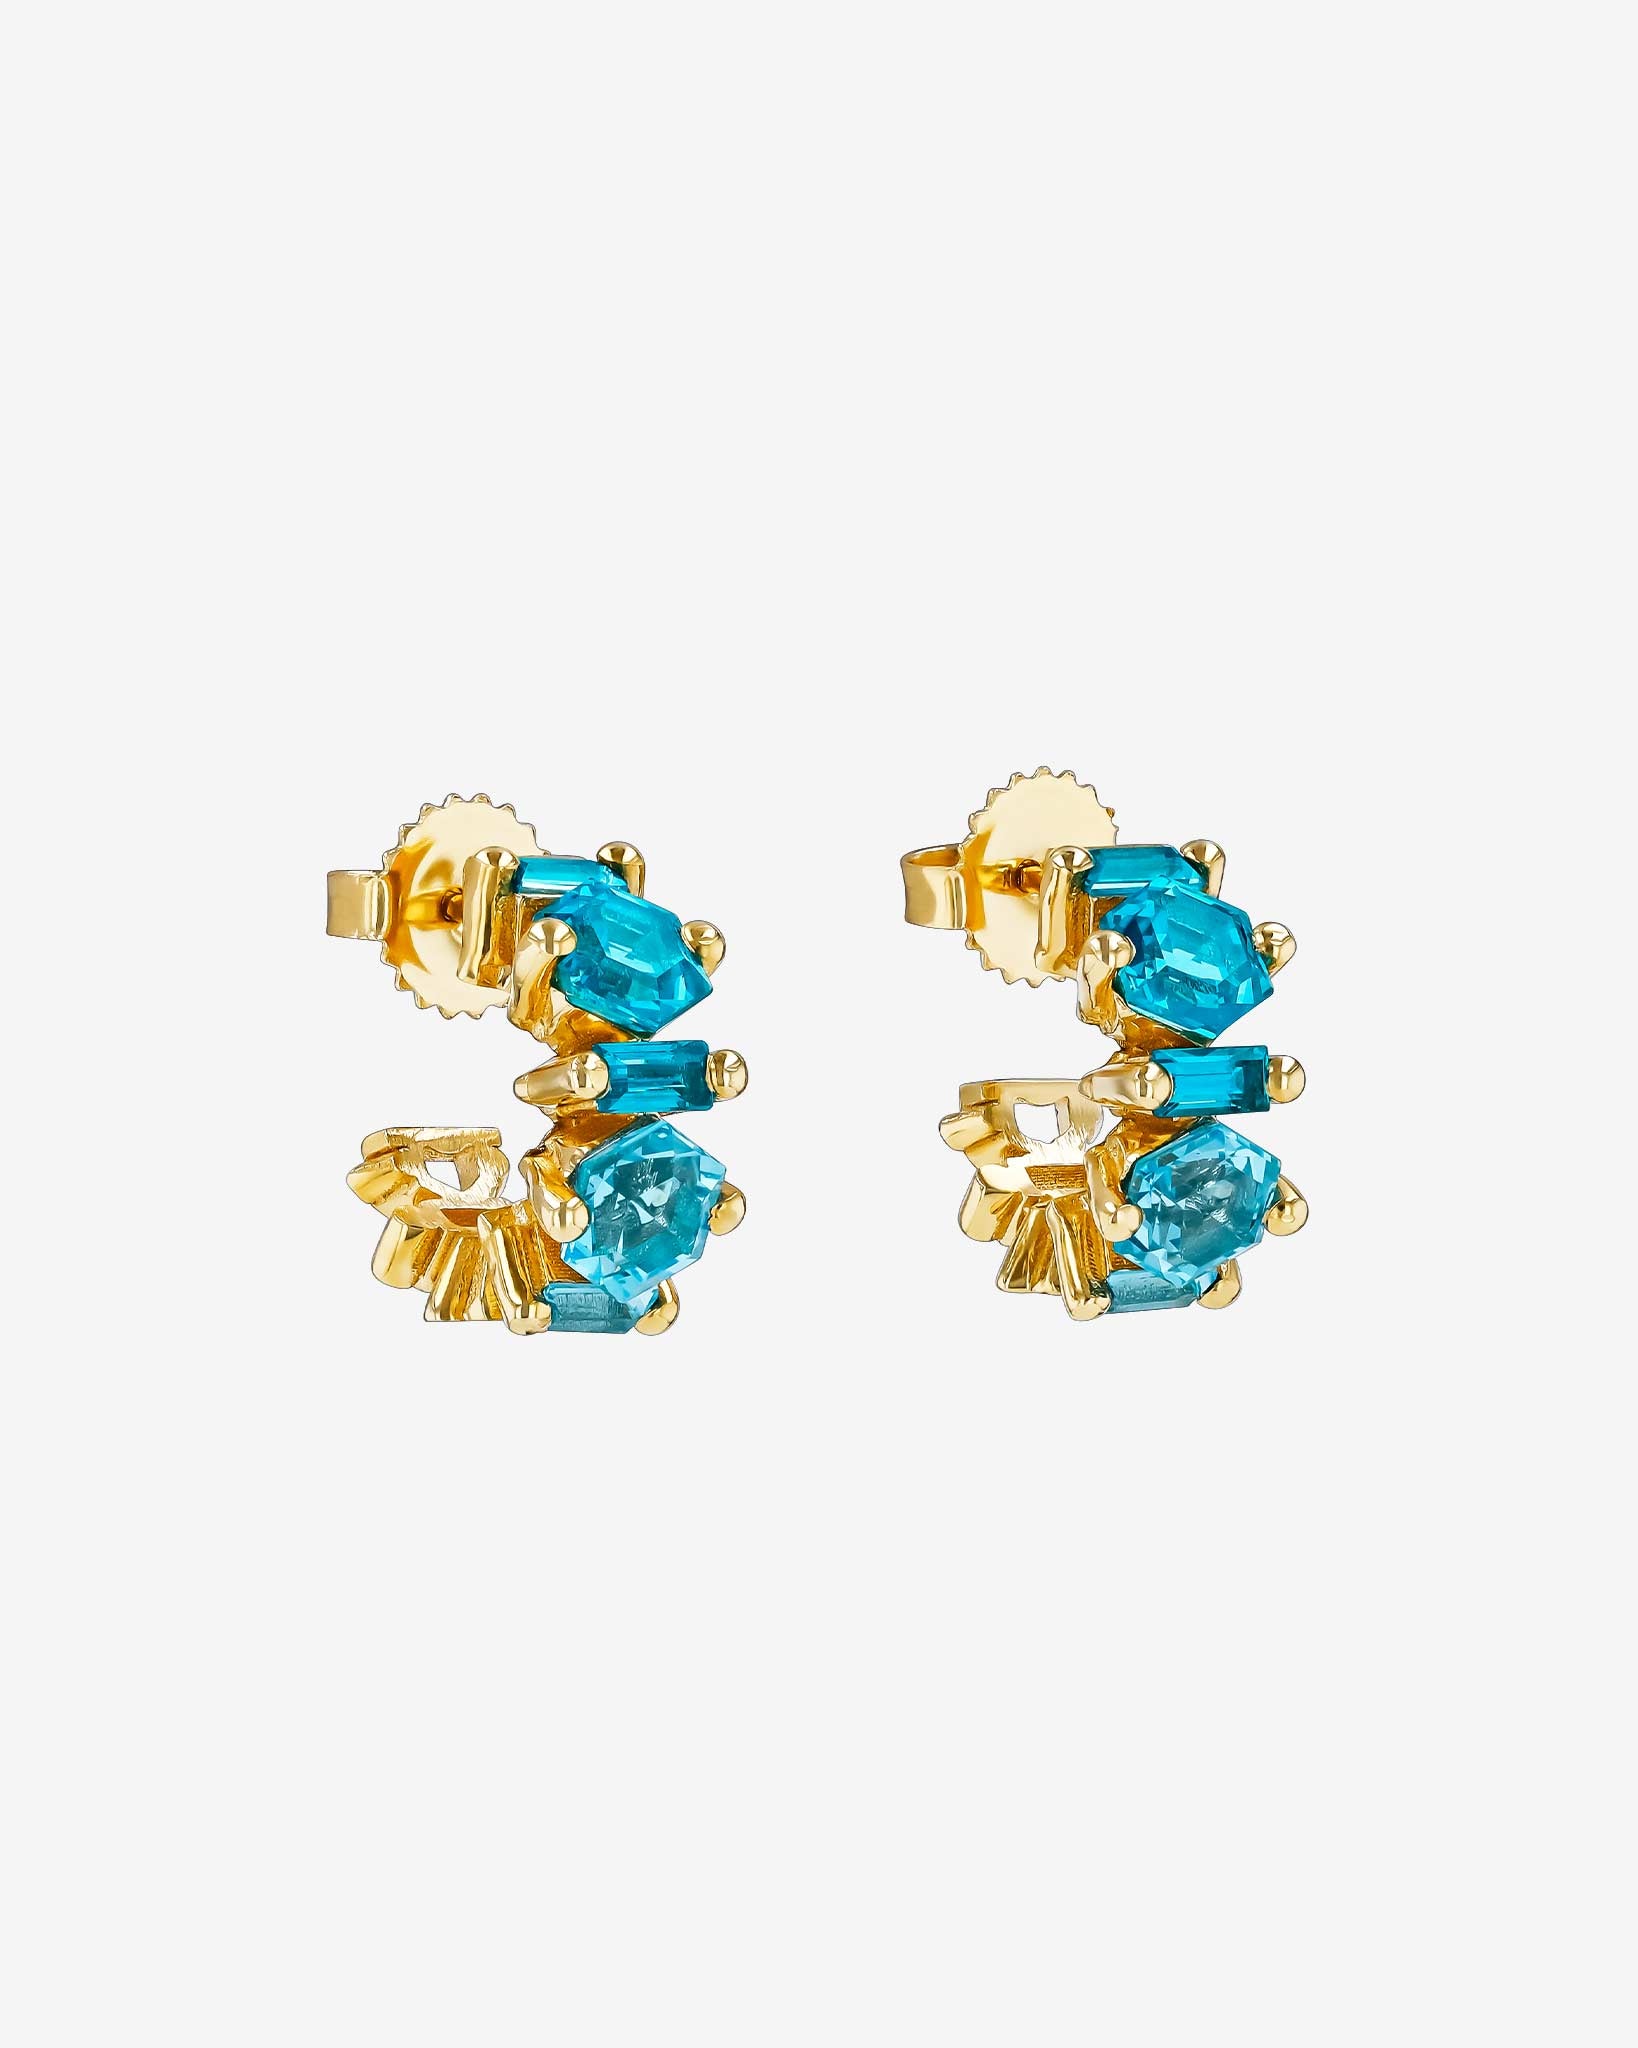 Kalan By Suzanne Kalan Nadima Blend Blue Ombre Mini Hoops in 14k yellow gold